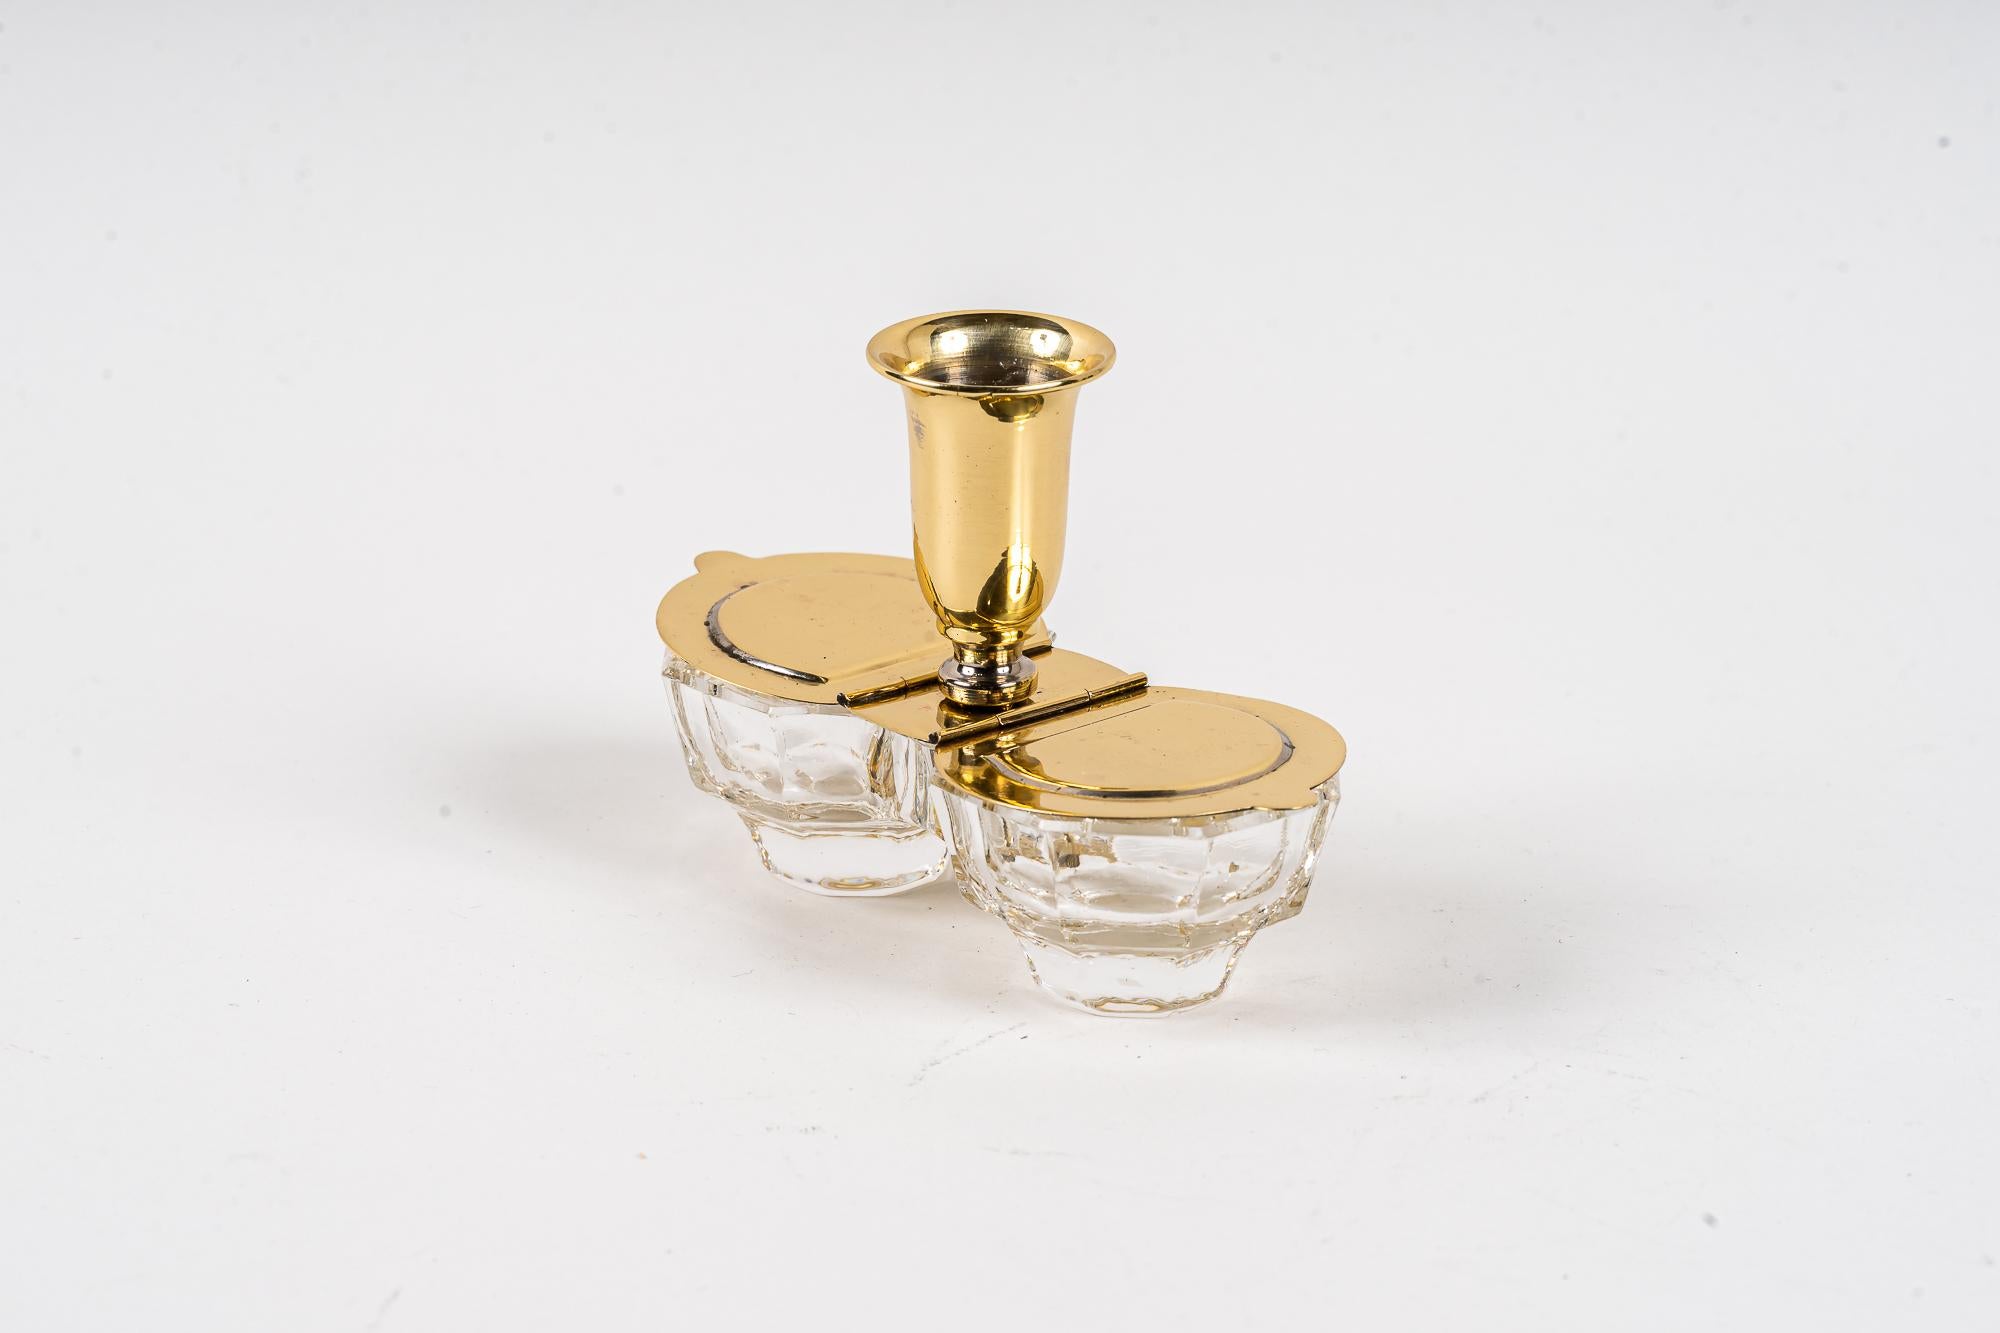 Art Deco salt and pepper cellars with toothpick holder around 1920s
Brass polished and stove-enamelled.